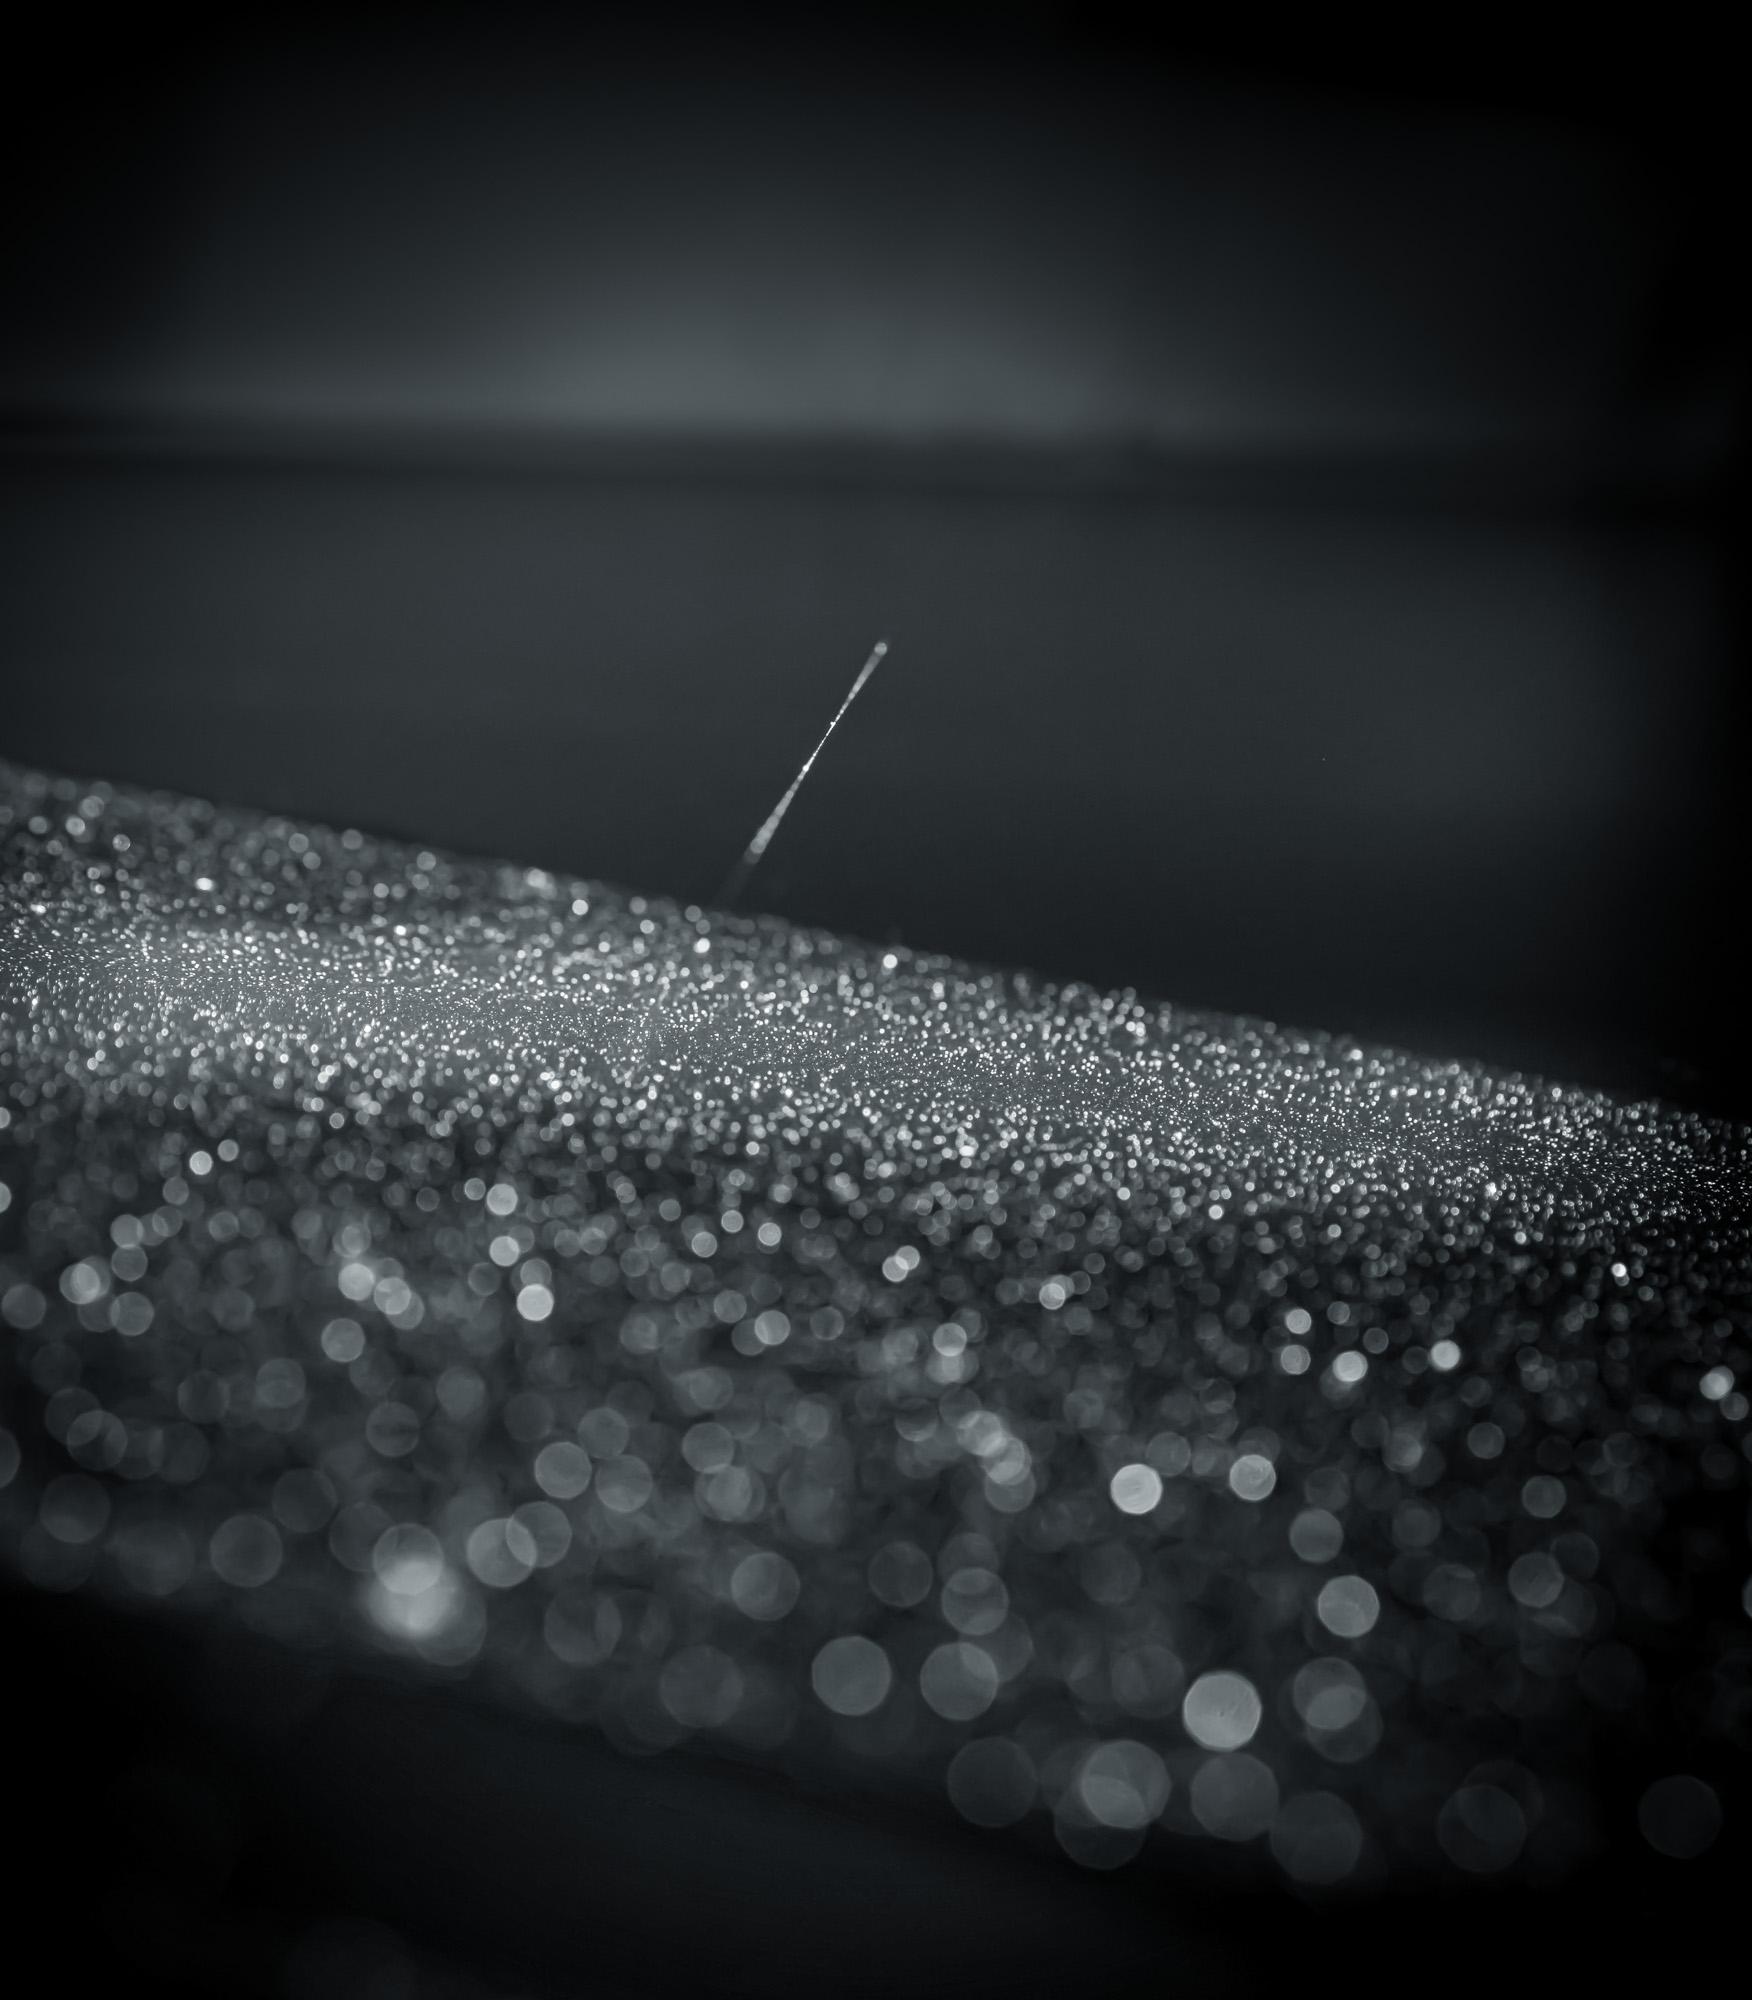 Howard Lewis Abstract Photograph - Limited Edition Abstract Black and White Photograph - Nature of Particles #2